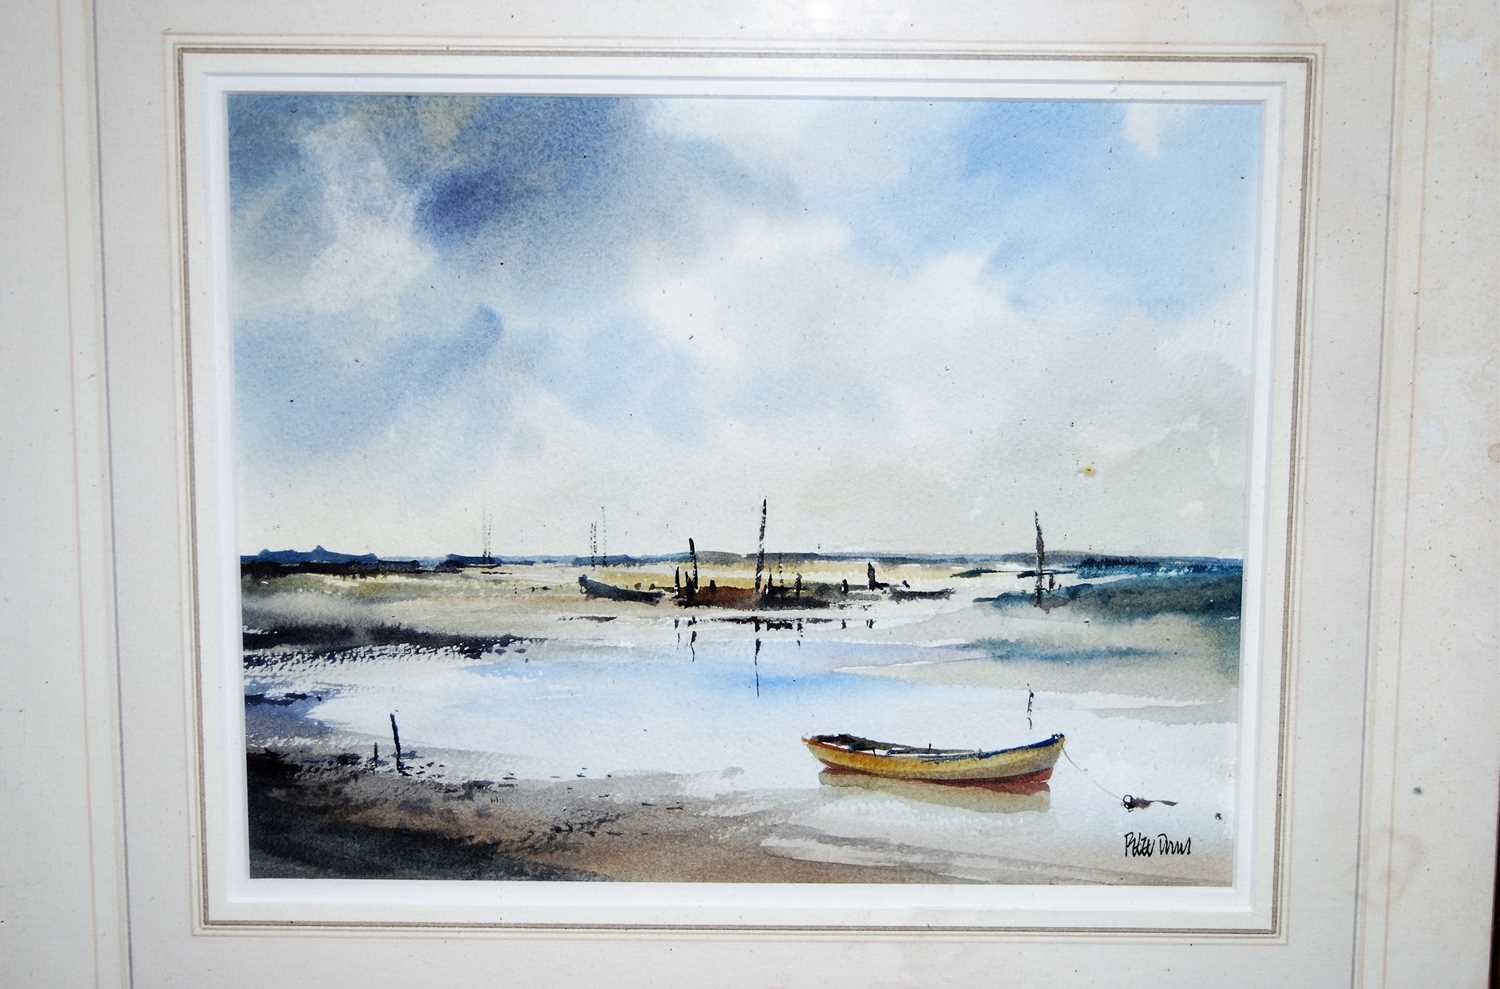 Peter Toms (b.1940) - Lowtide at Morston, watercolour, signed lower right, 21 x 26cmCondition